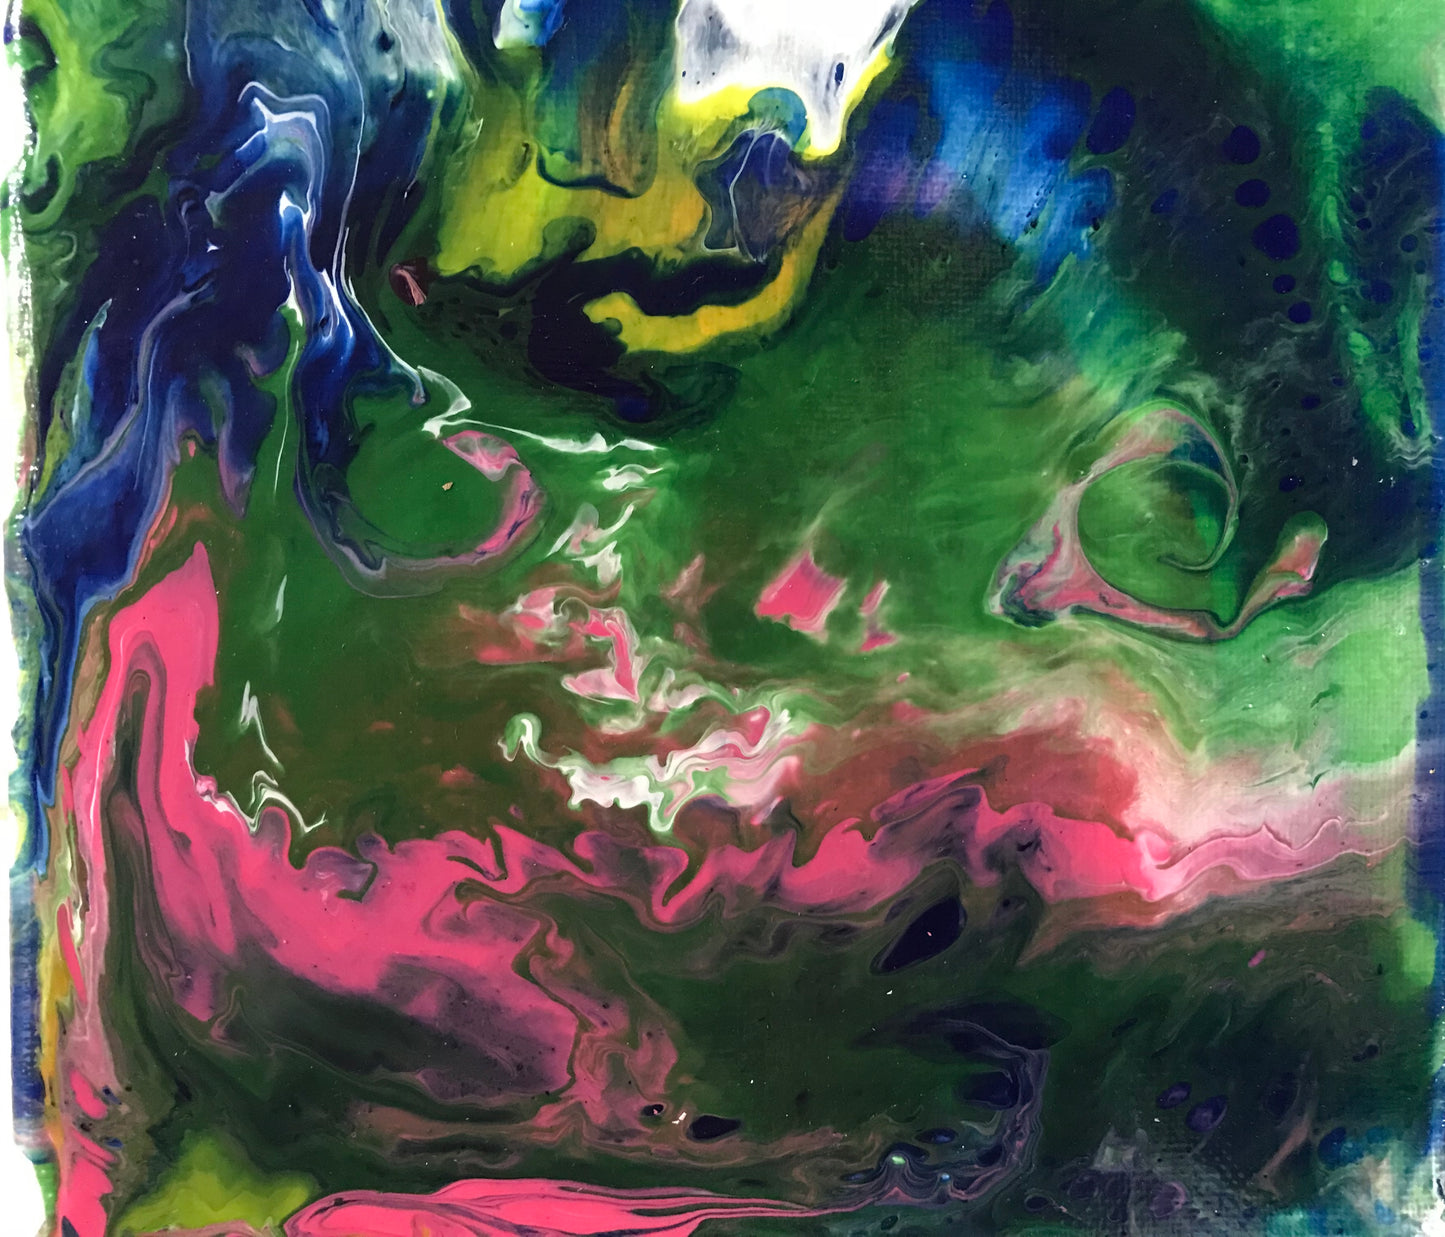 Thu, May 27, 3-5pm “Cellar Sessions: Acrylic Pour” Virtual Wine and Paint Class